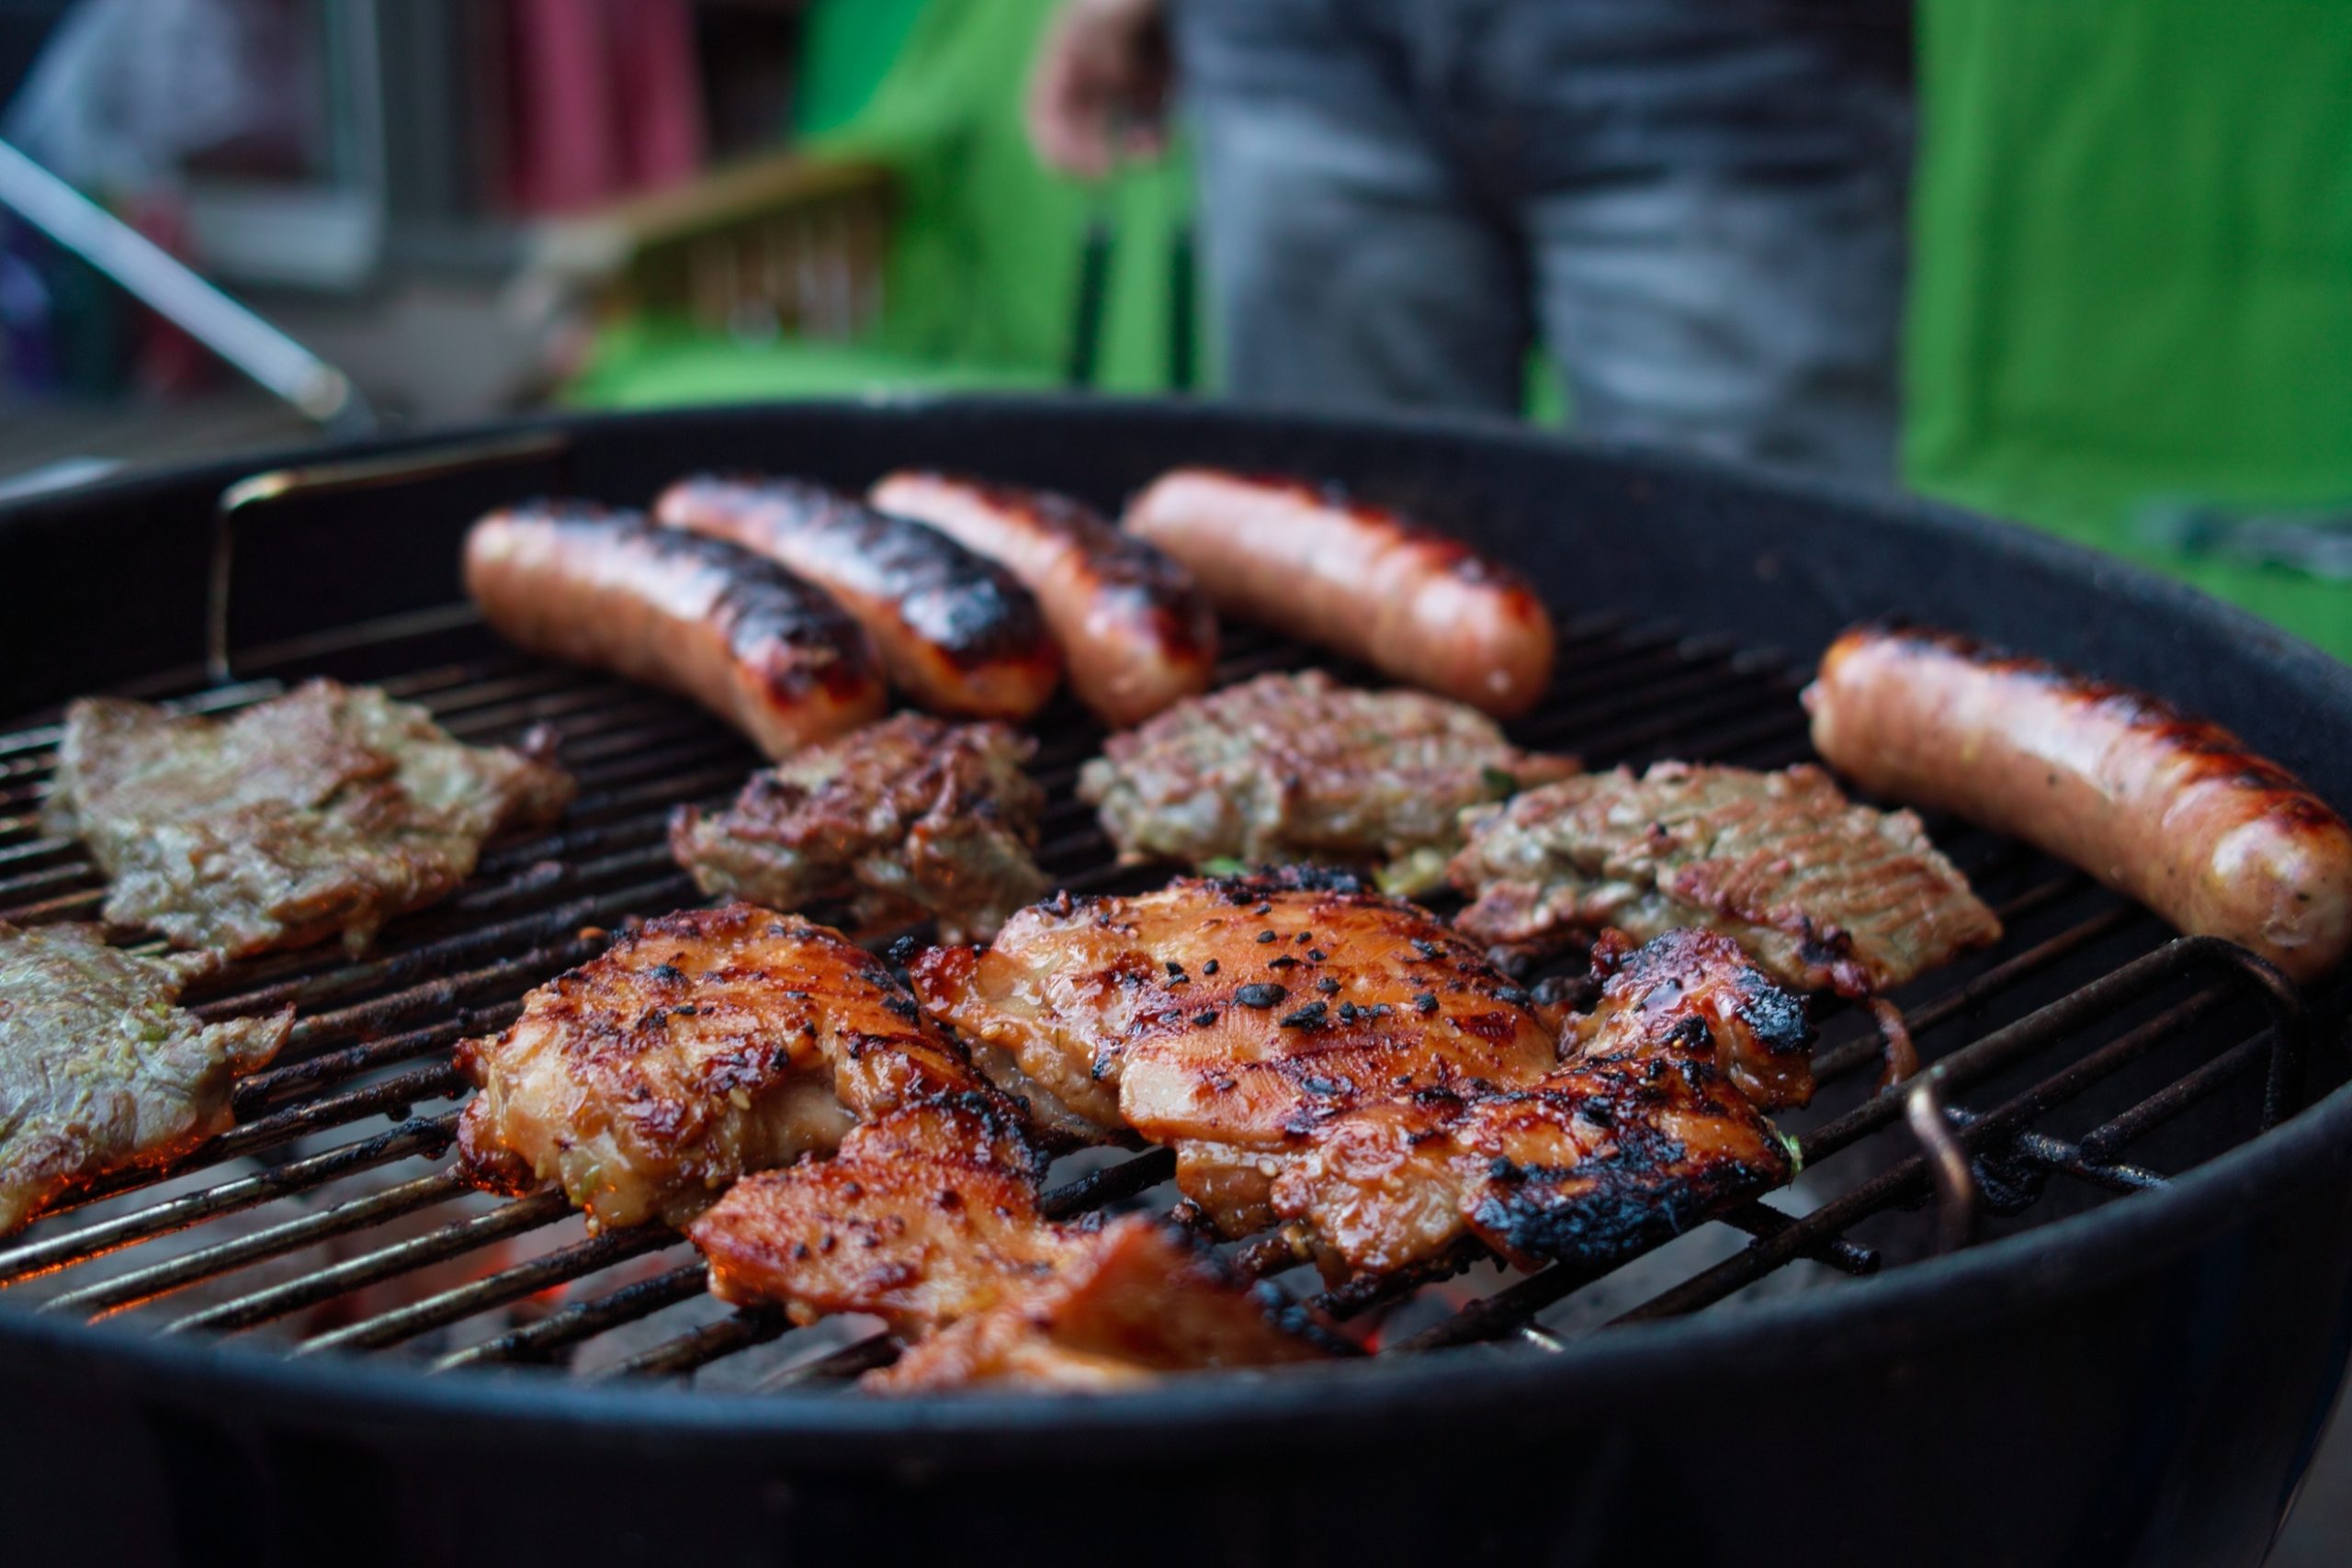 Top 4 Grilling Trends That Are Gaining Popularity in 2023